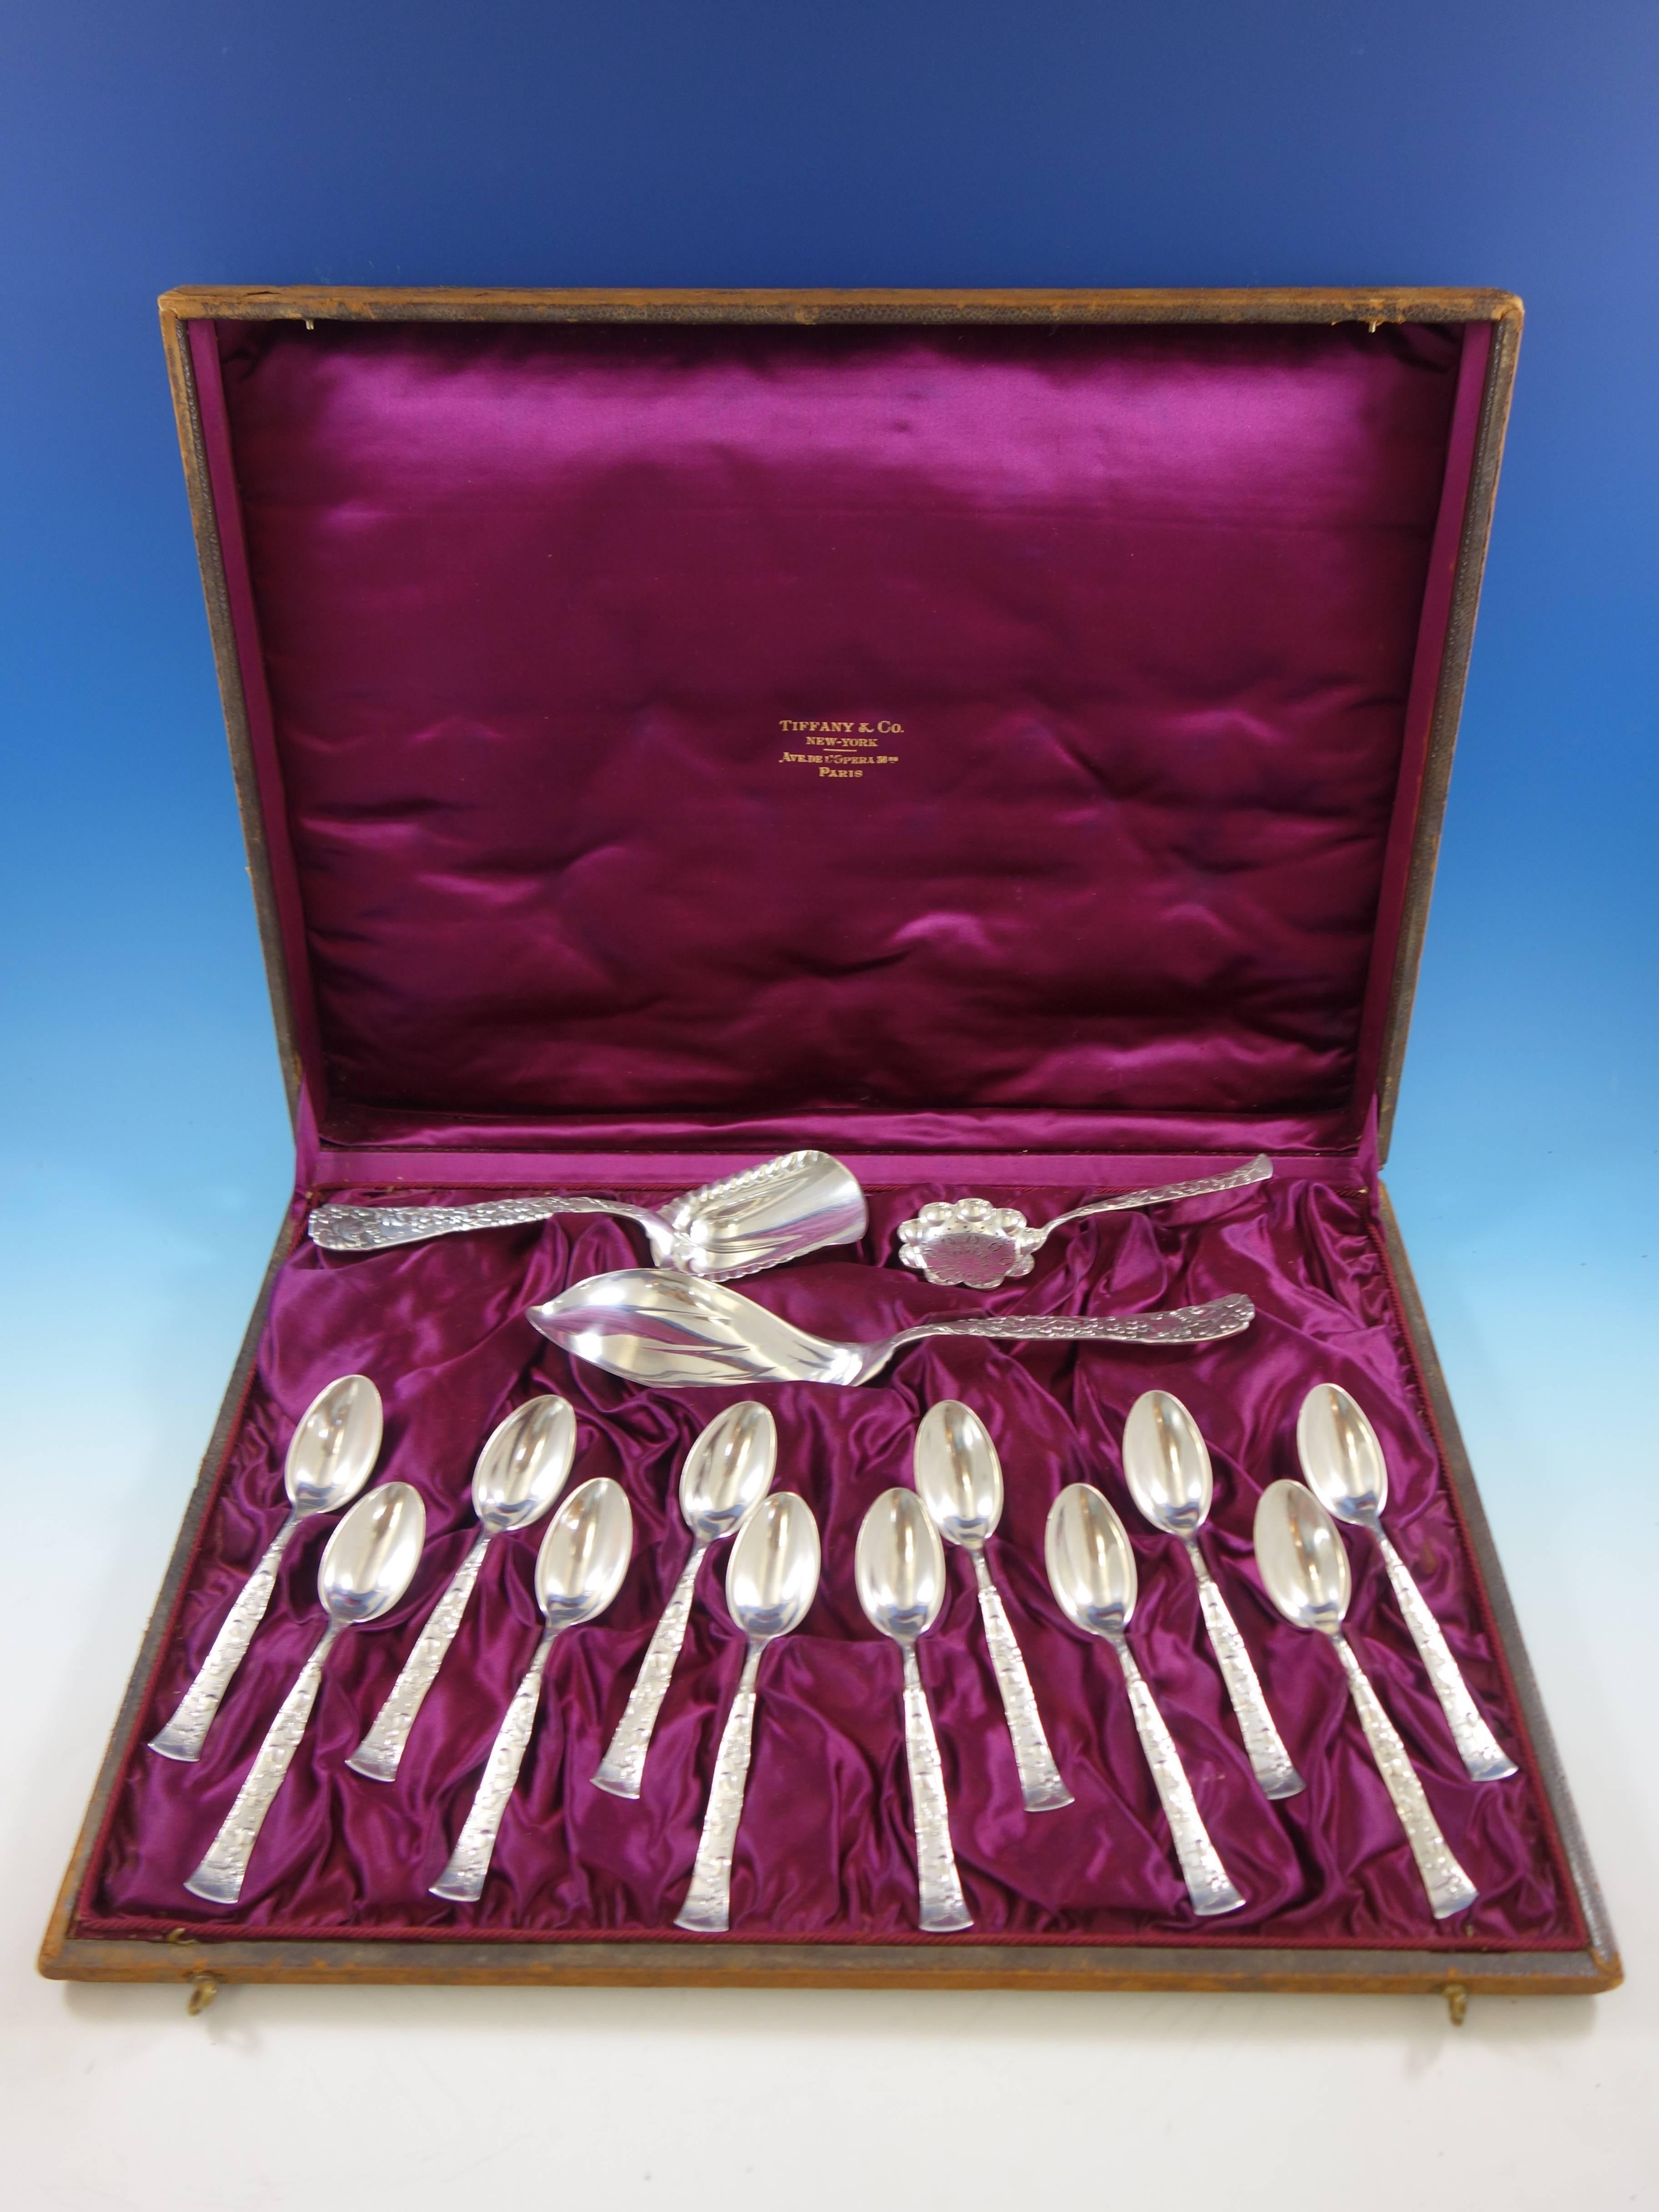 Vine by Tiffany & Co.
Outstanding antique Vine by Tiffany Sterling silver 15 piece ice cream set of 12 ice cream spoons with gourds - 6